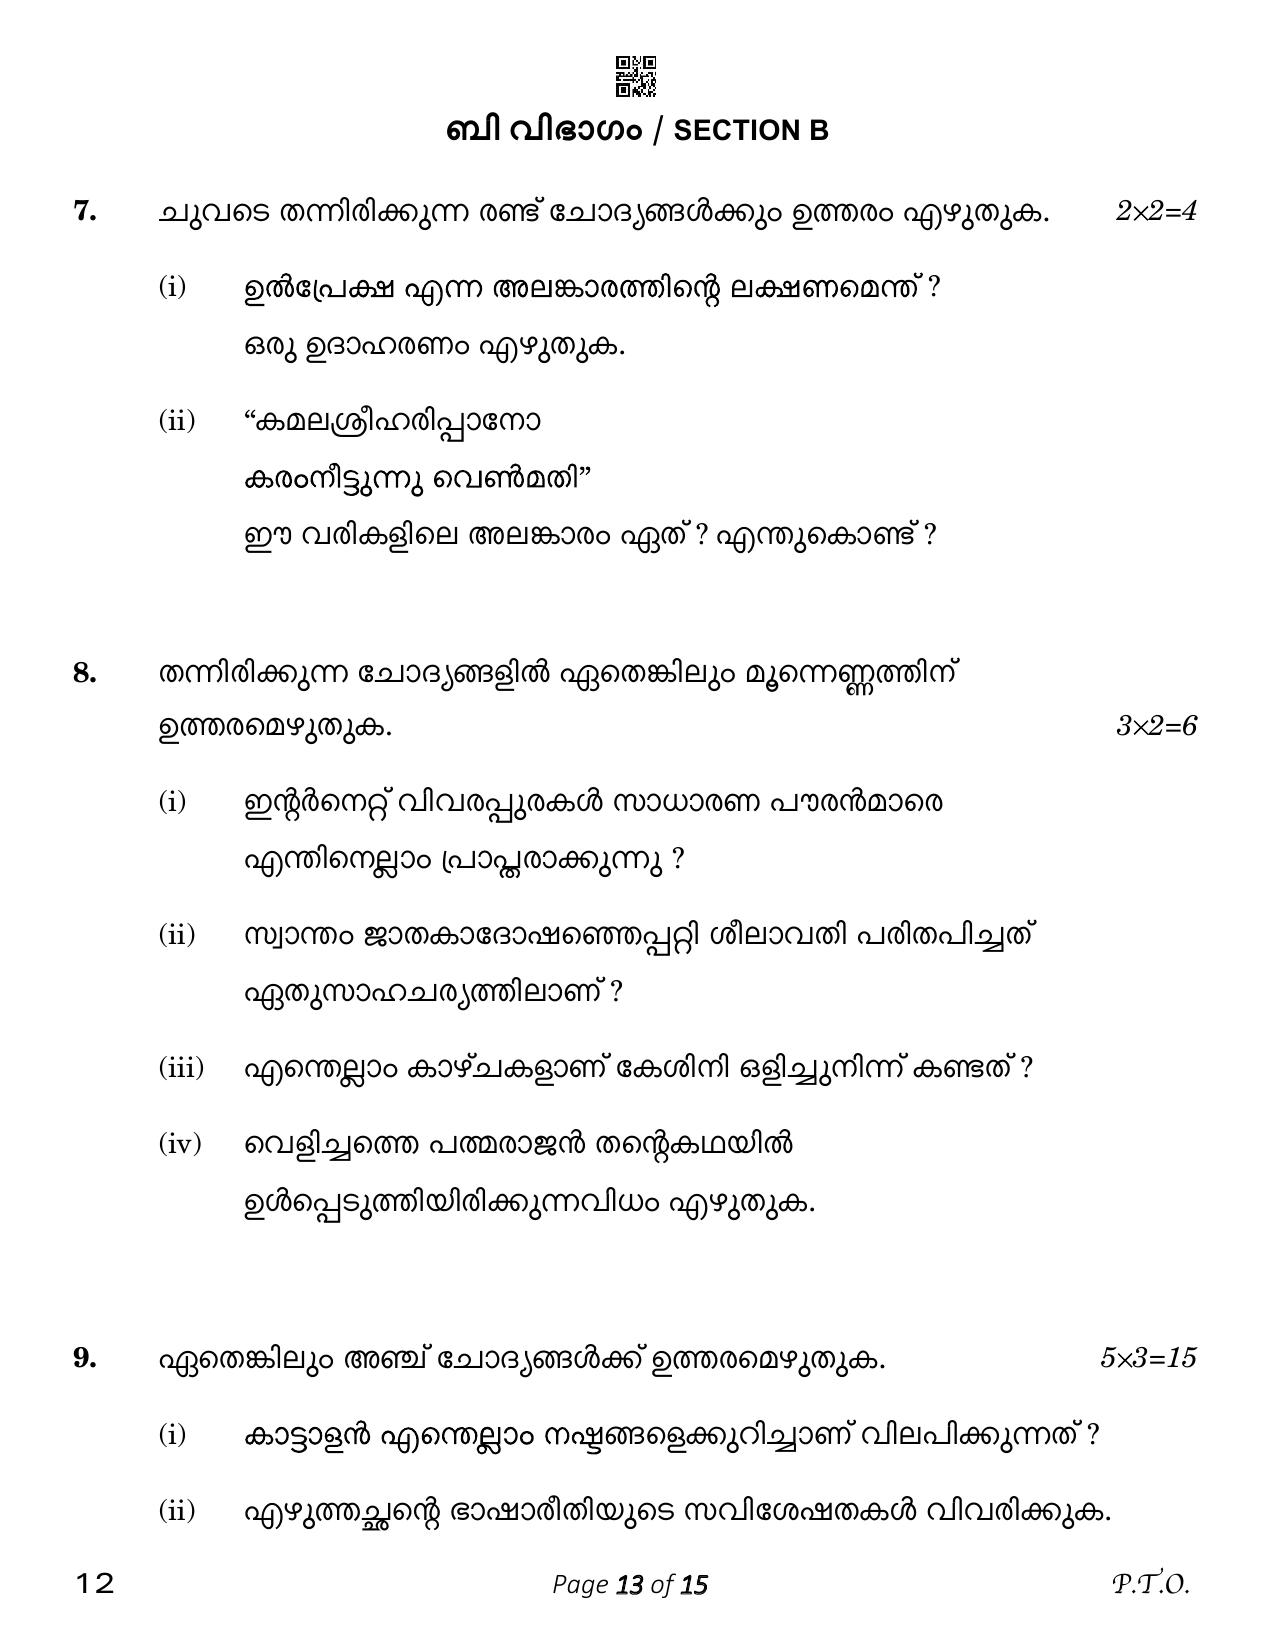 CBSE Class 12 Malayalam (Compartment) 2023 Question Paper - Page 13